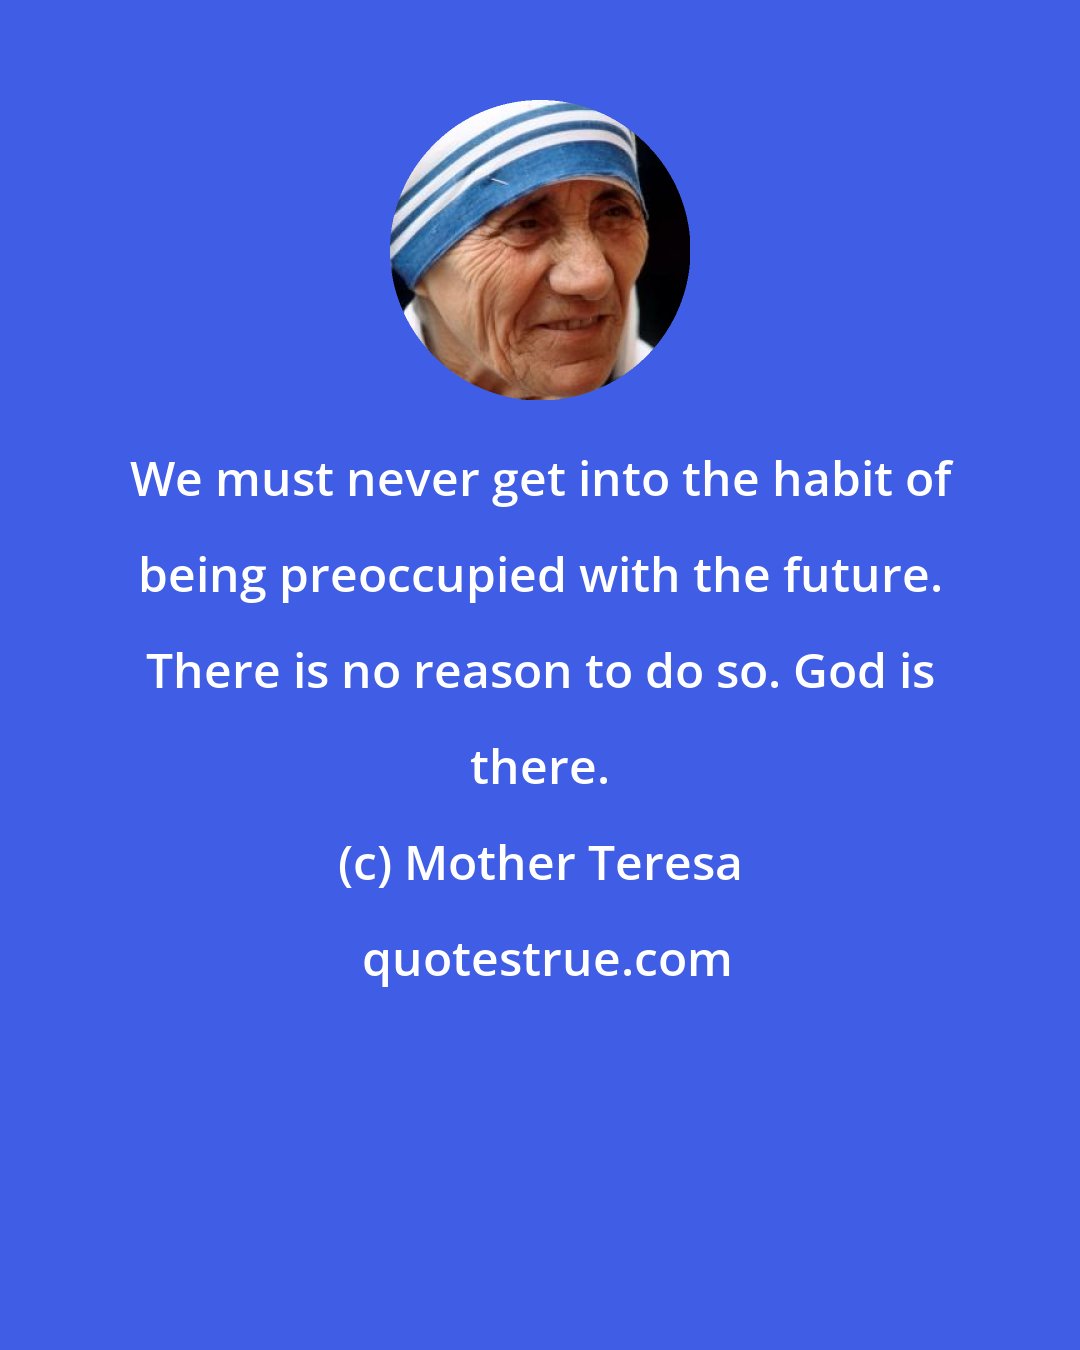 Mother Teresa: We must never get into the habit of being preoccupied with the future. There is no reason to do so. God is there.